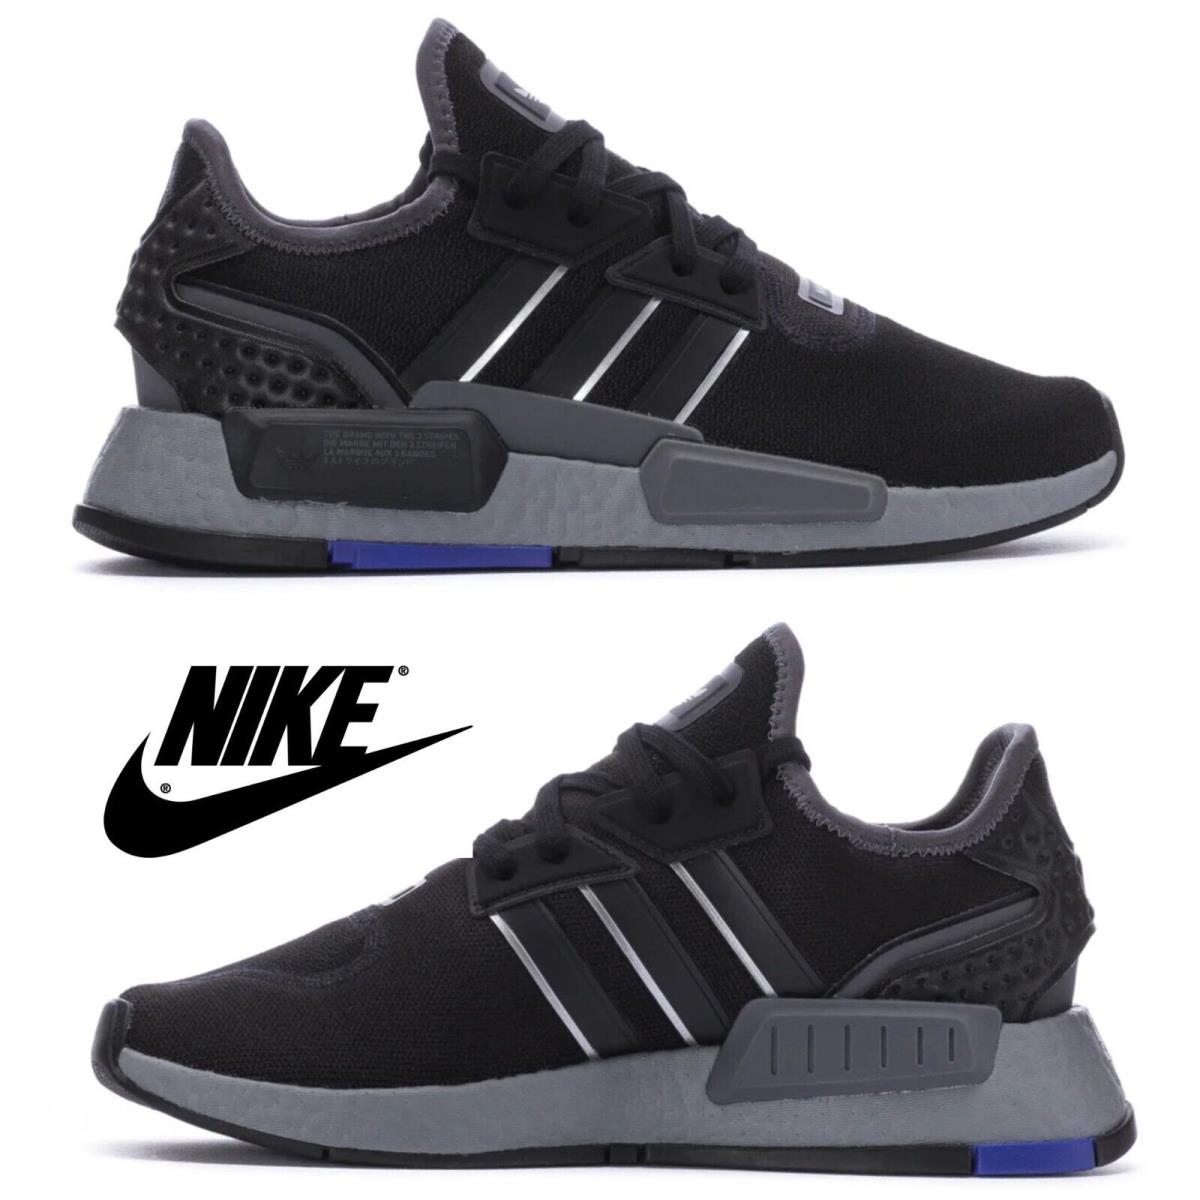 Adidas Originals Nmd G1 Shoes Men`s Sneakers Running Casual Shoes Black